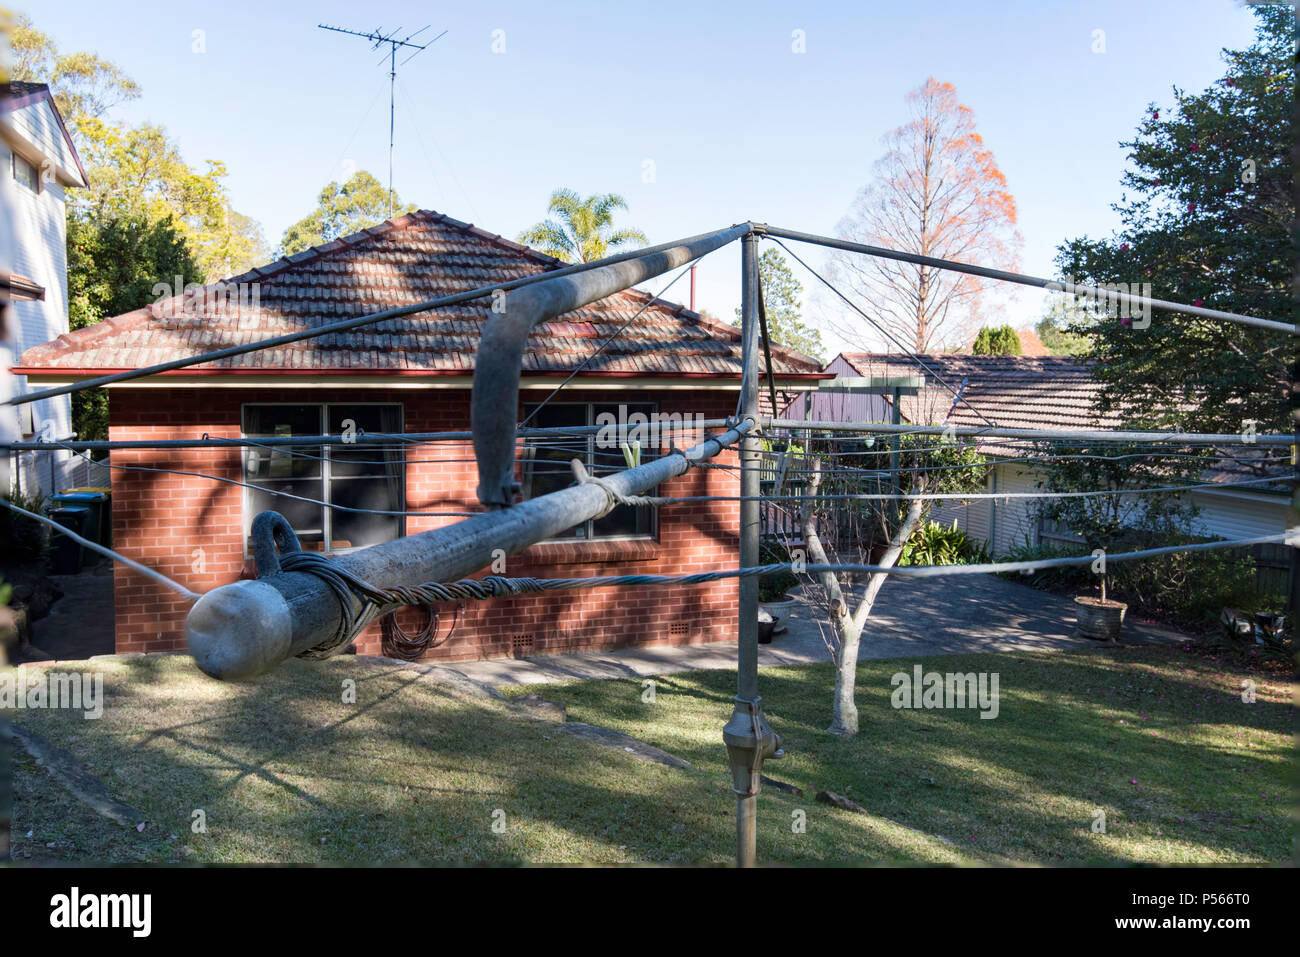 A  well preserved early1960s Hills Hoist clothes drying line in a backyard and a red brick tile roof home from 1964 in Australia Stock Photo